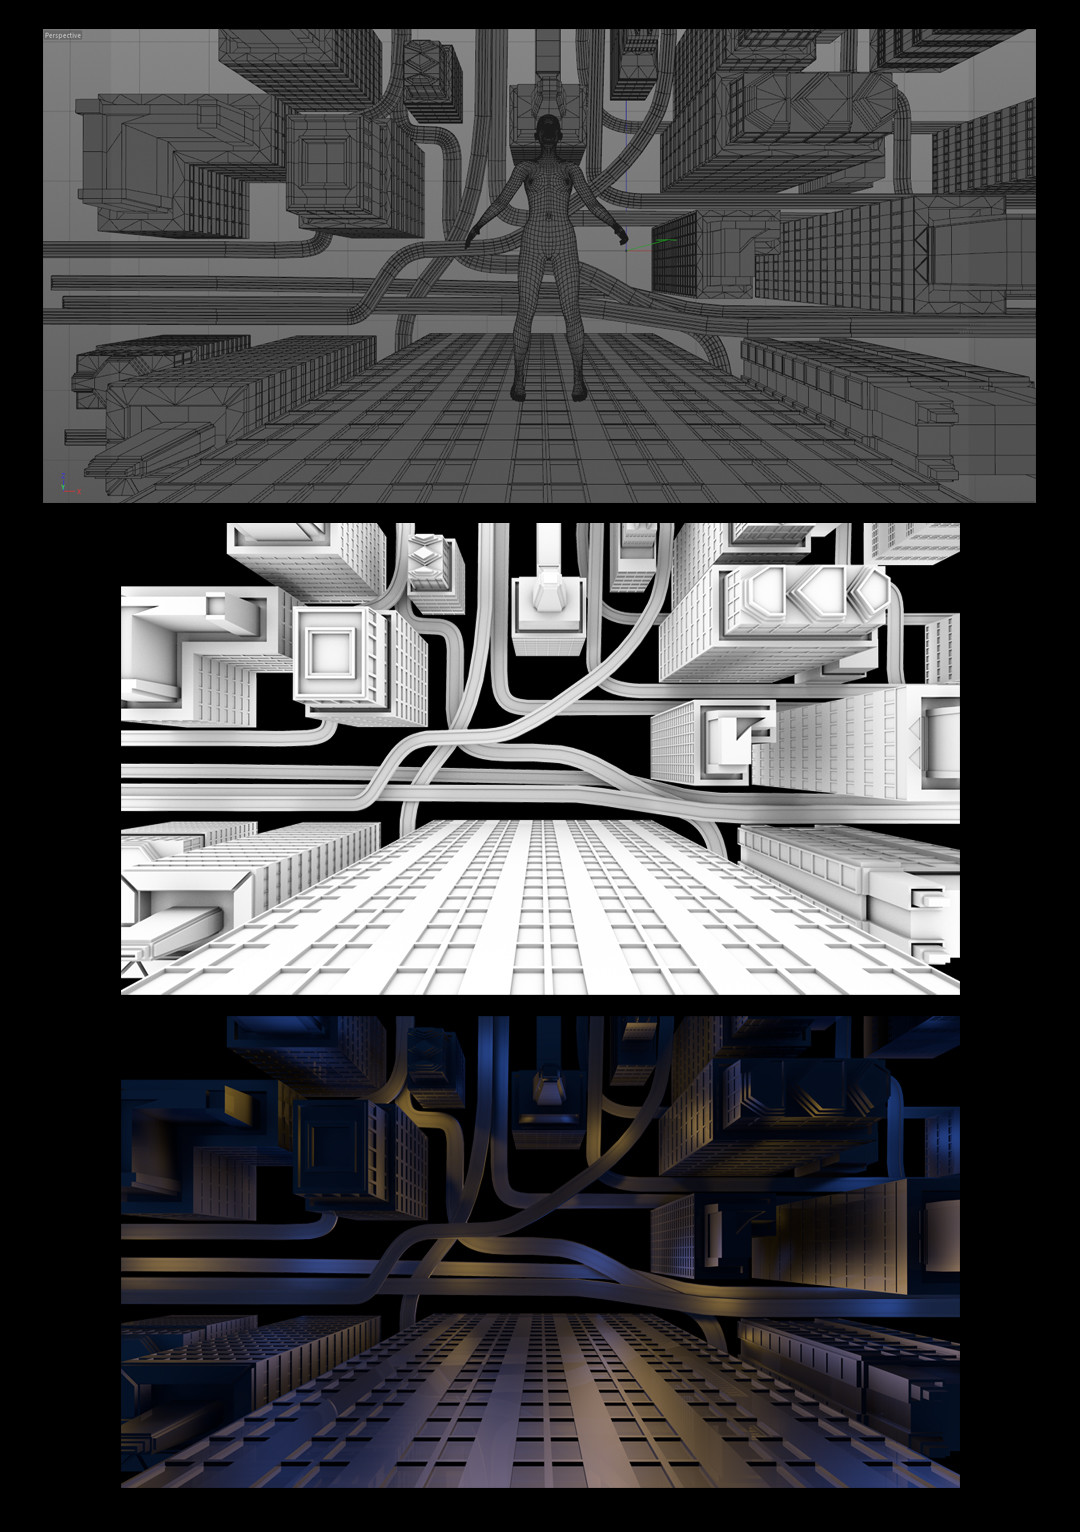 Few rendering steps from cinema 4D.
Ambient occlusion / Diffuse / Reflection with lights. 